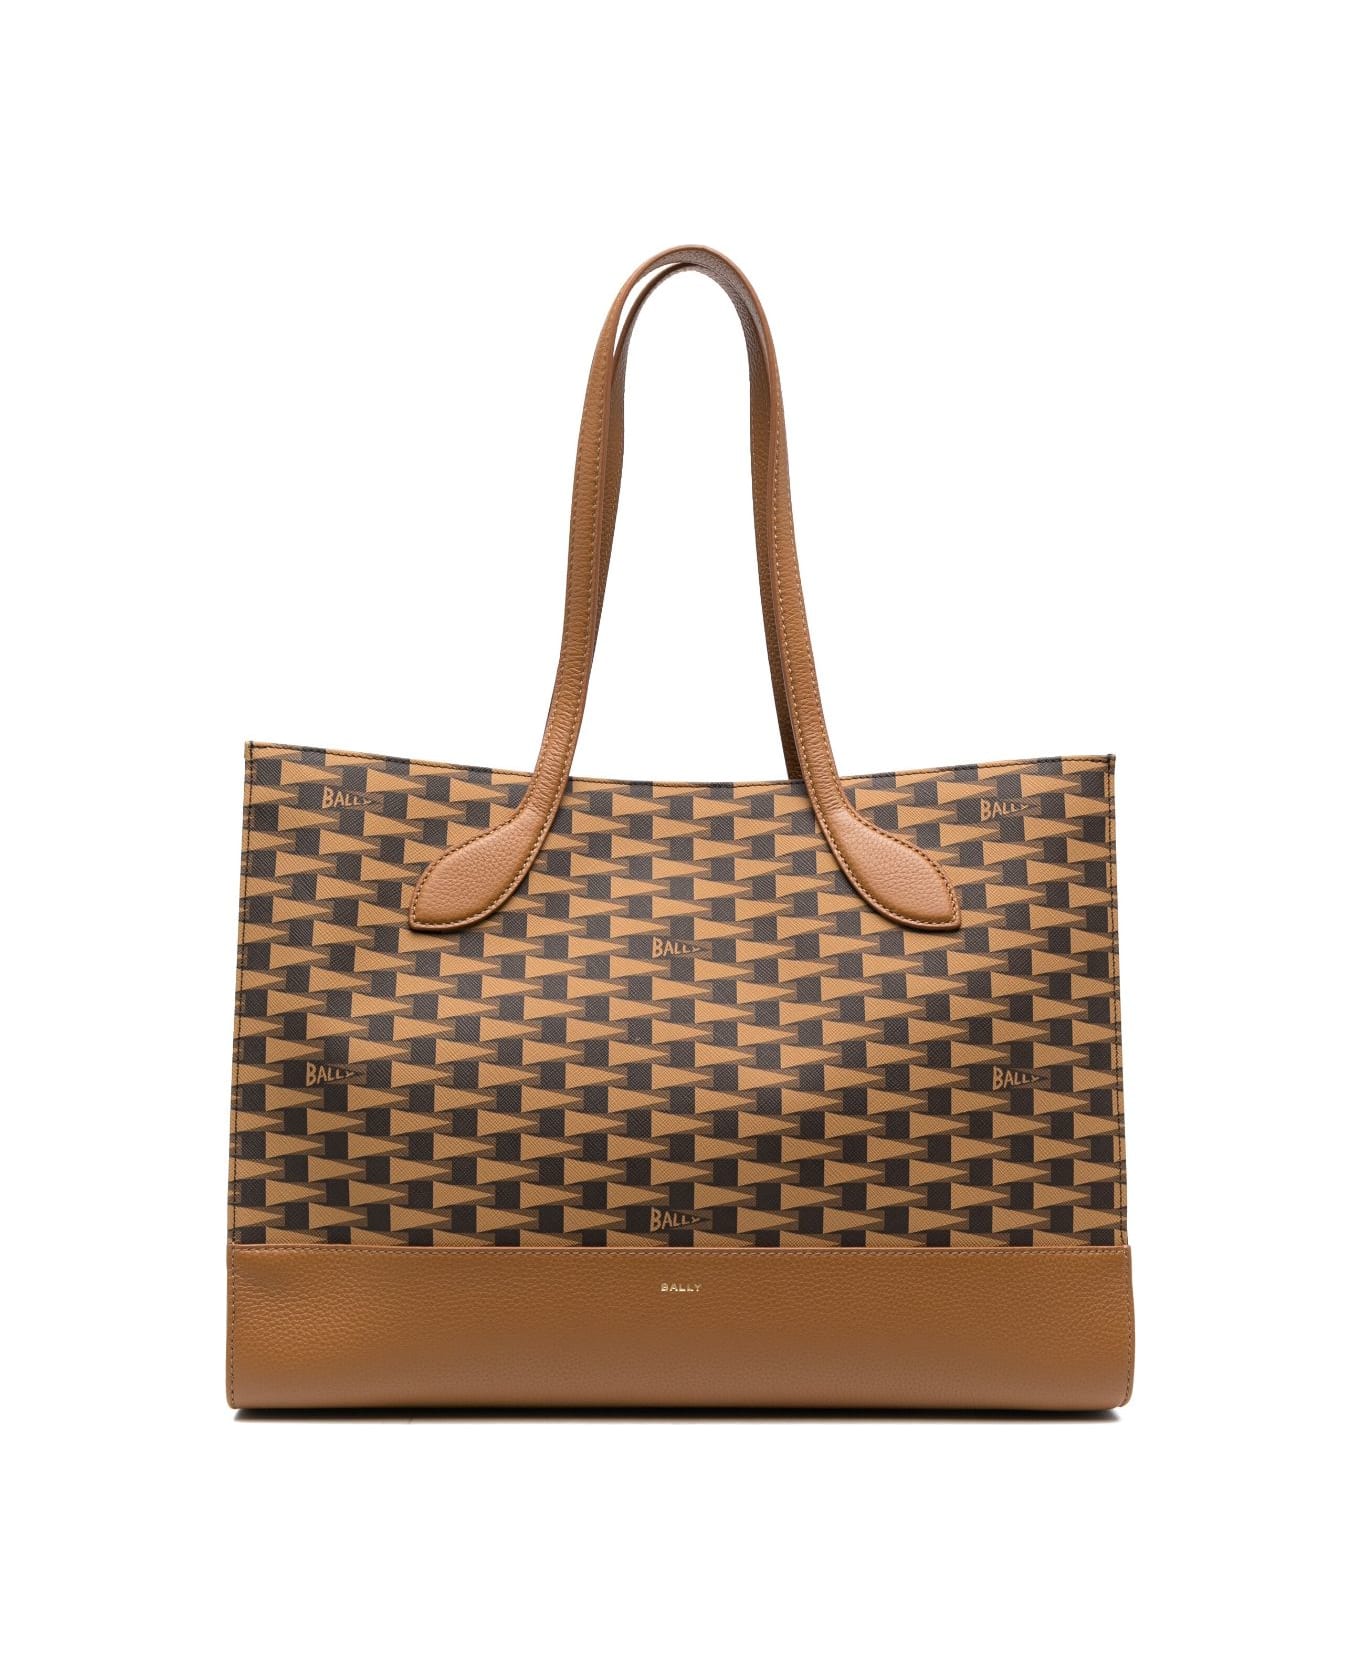 Bally Pennant Tote Bag - Beige トートバッグ